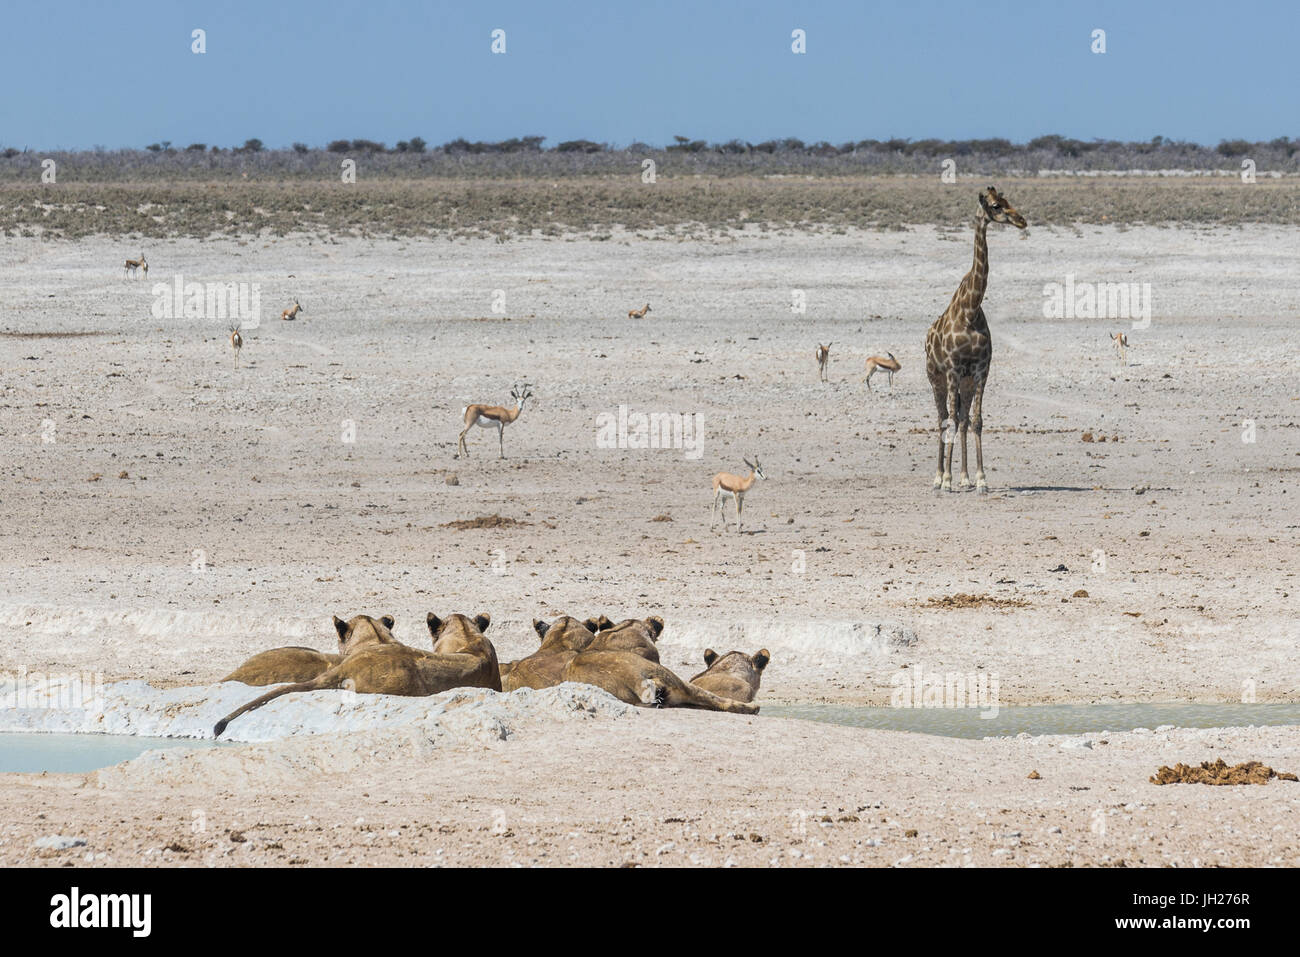 Lions (Panthera leo) at a waterhole in the Etosha National Park, Namibia, Africa Stock Photo